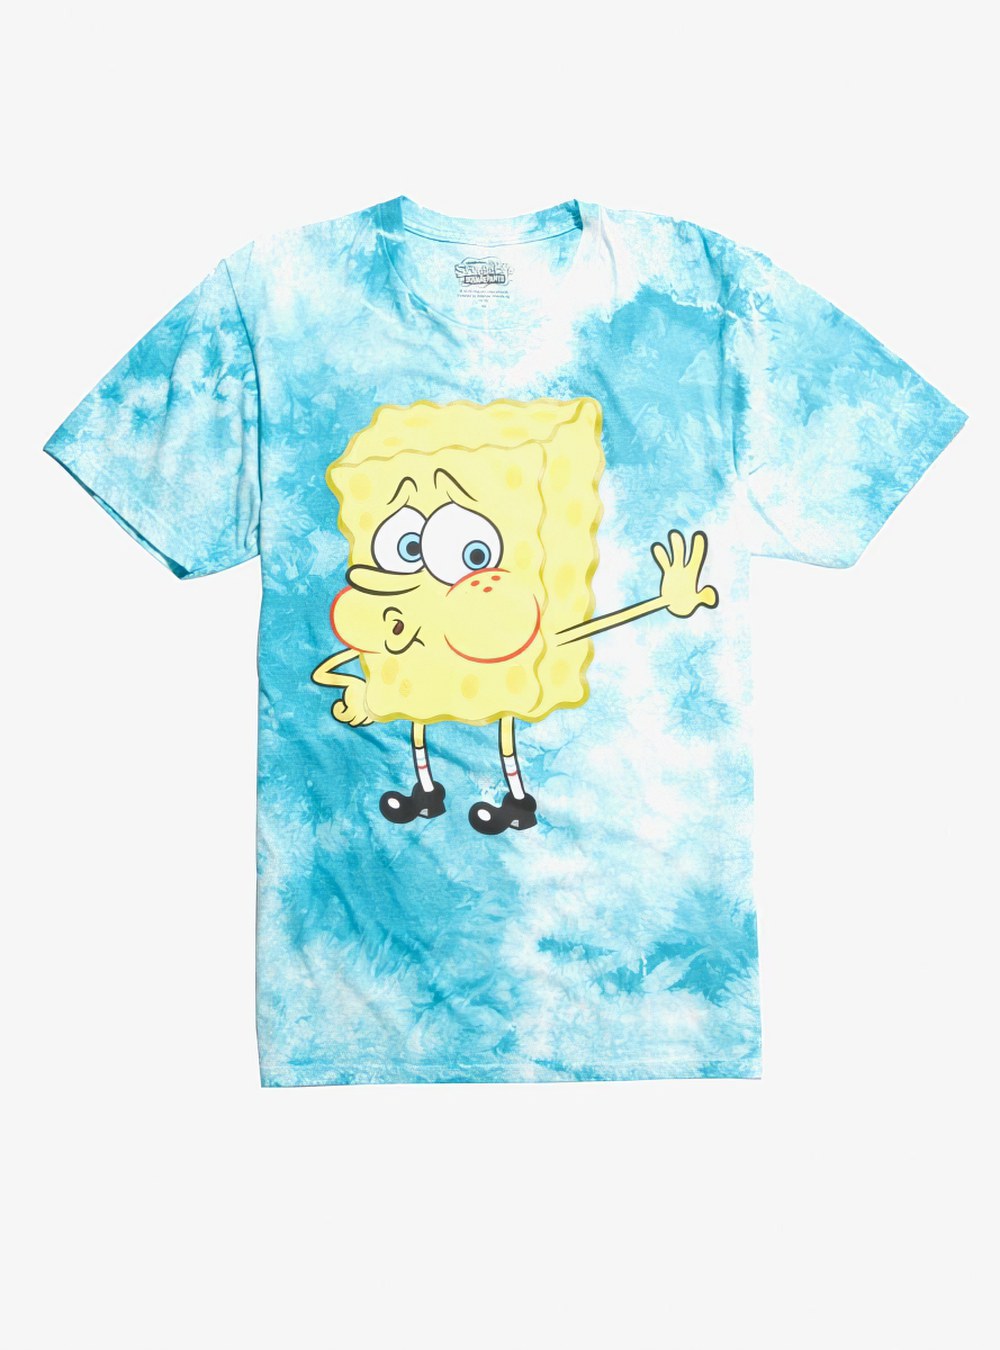 Gangster Spongebob Whistling 3d Shirt Plus Size Up To 5xl